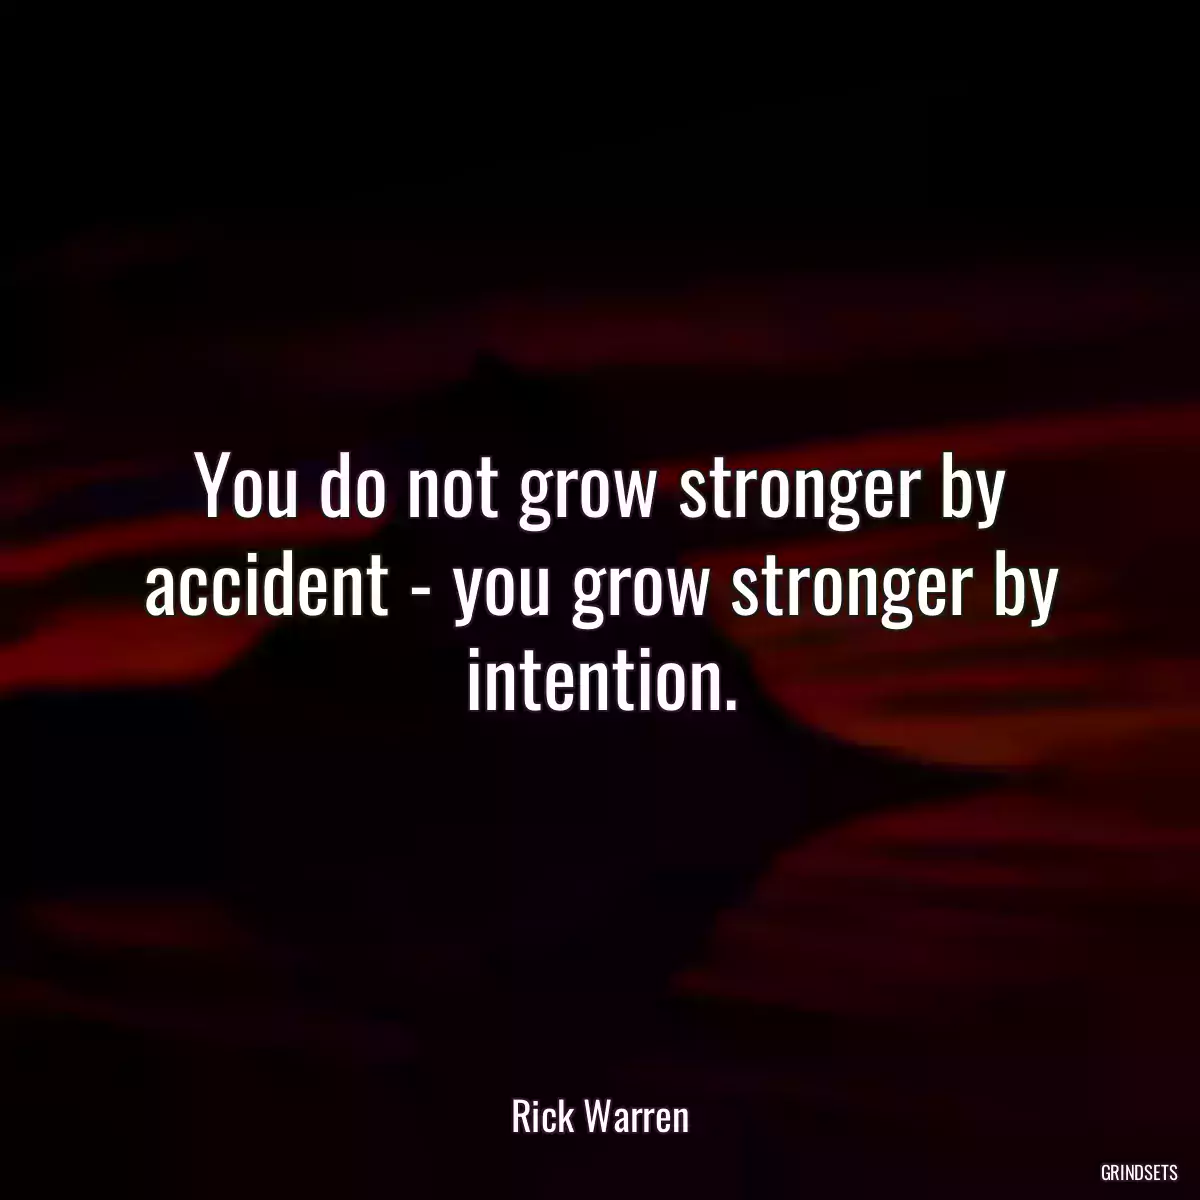 You do not grow stronger by accident - you grow stronger by intention.